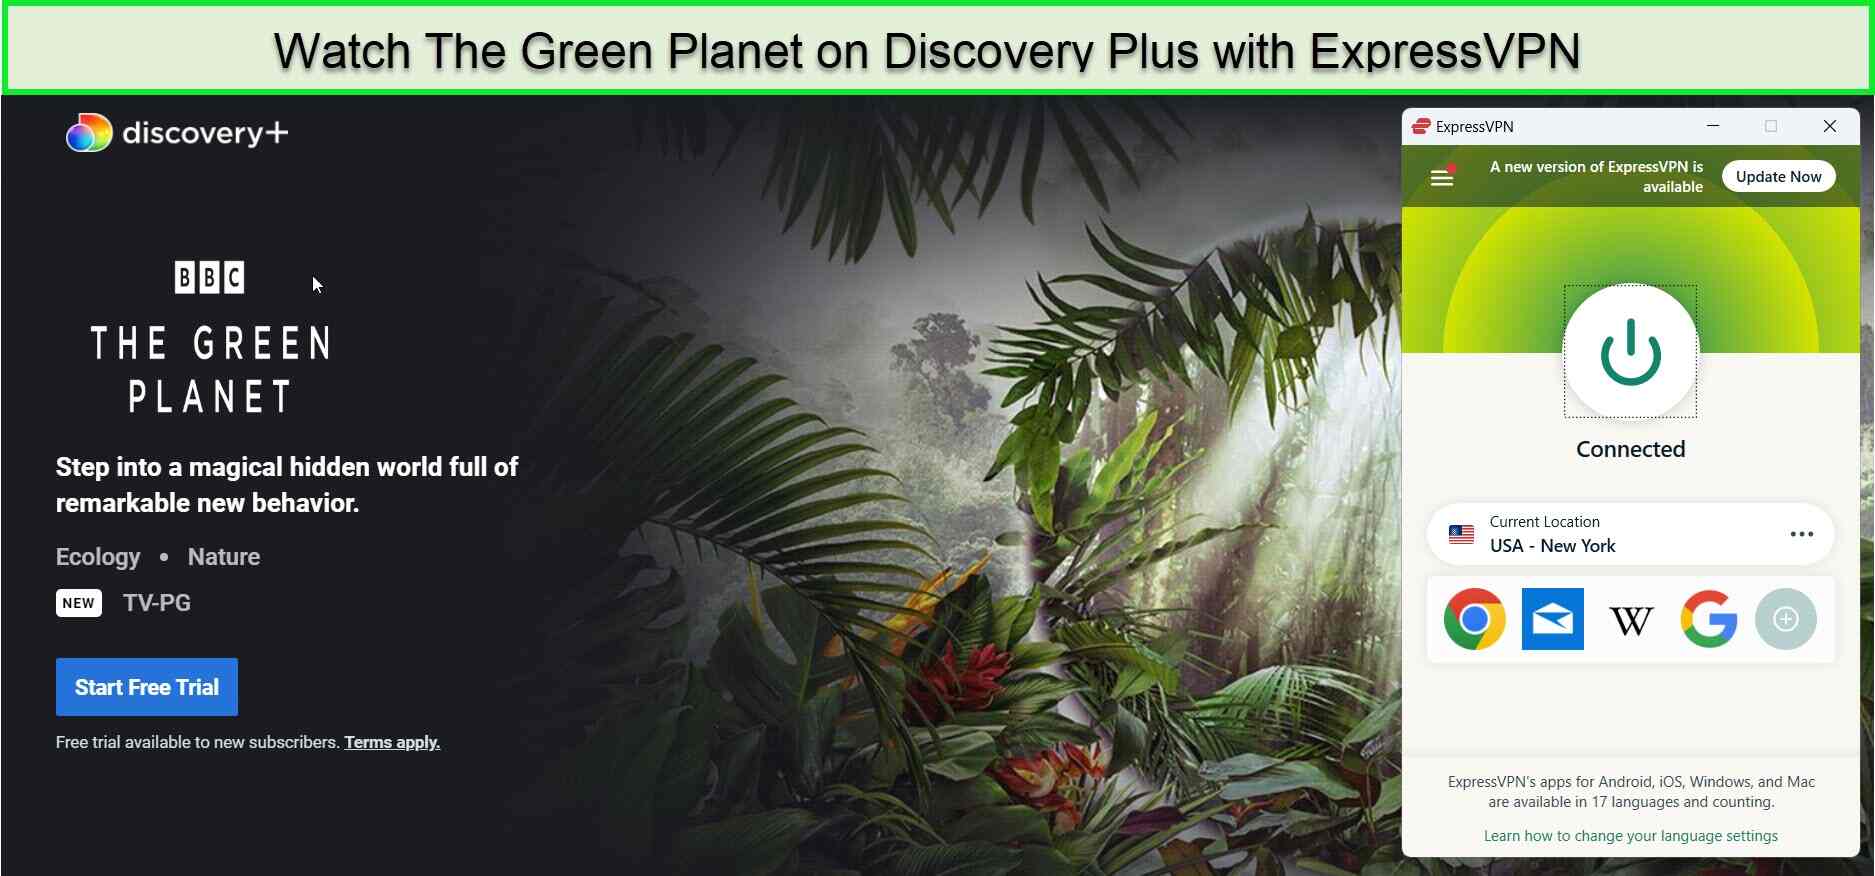 Watch-The-Green-Planet-in-Singapore-on-Discovery-Plus-with-ExpressVPN